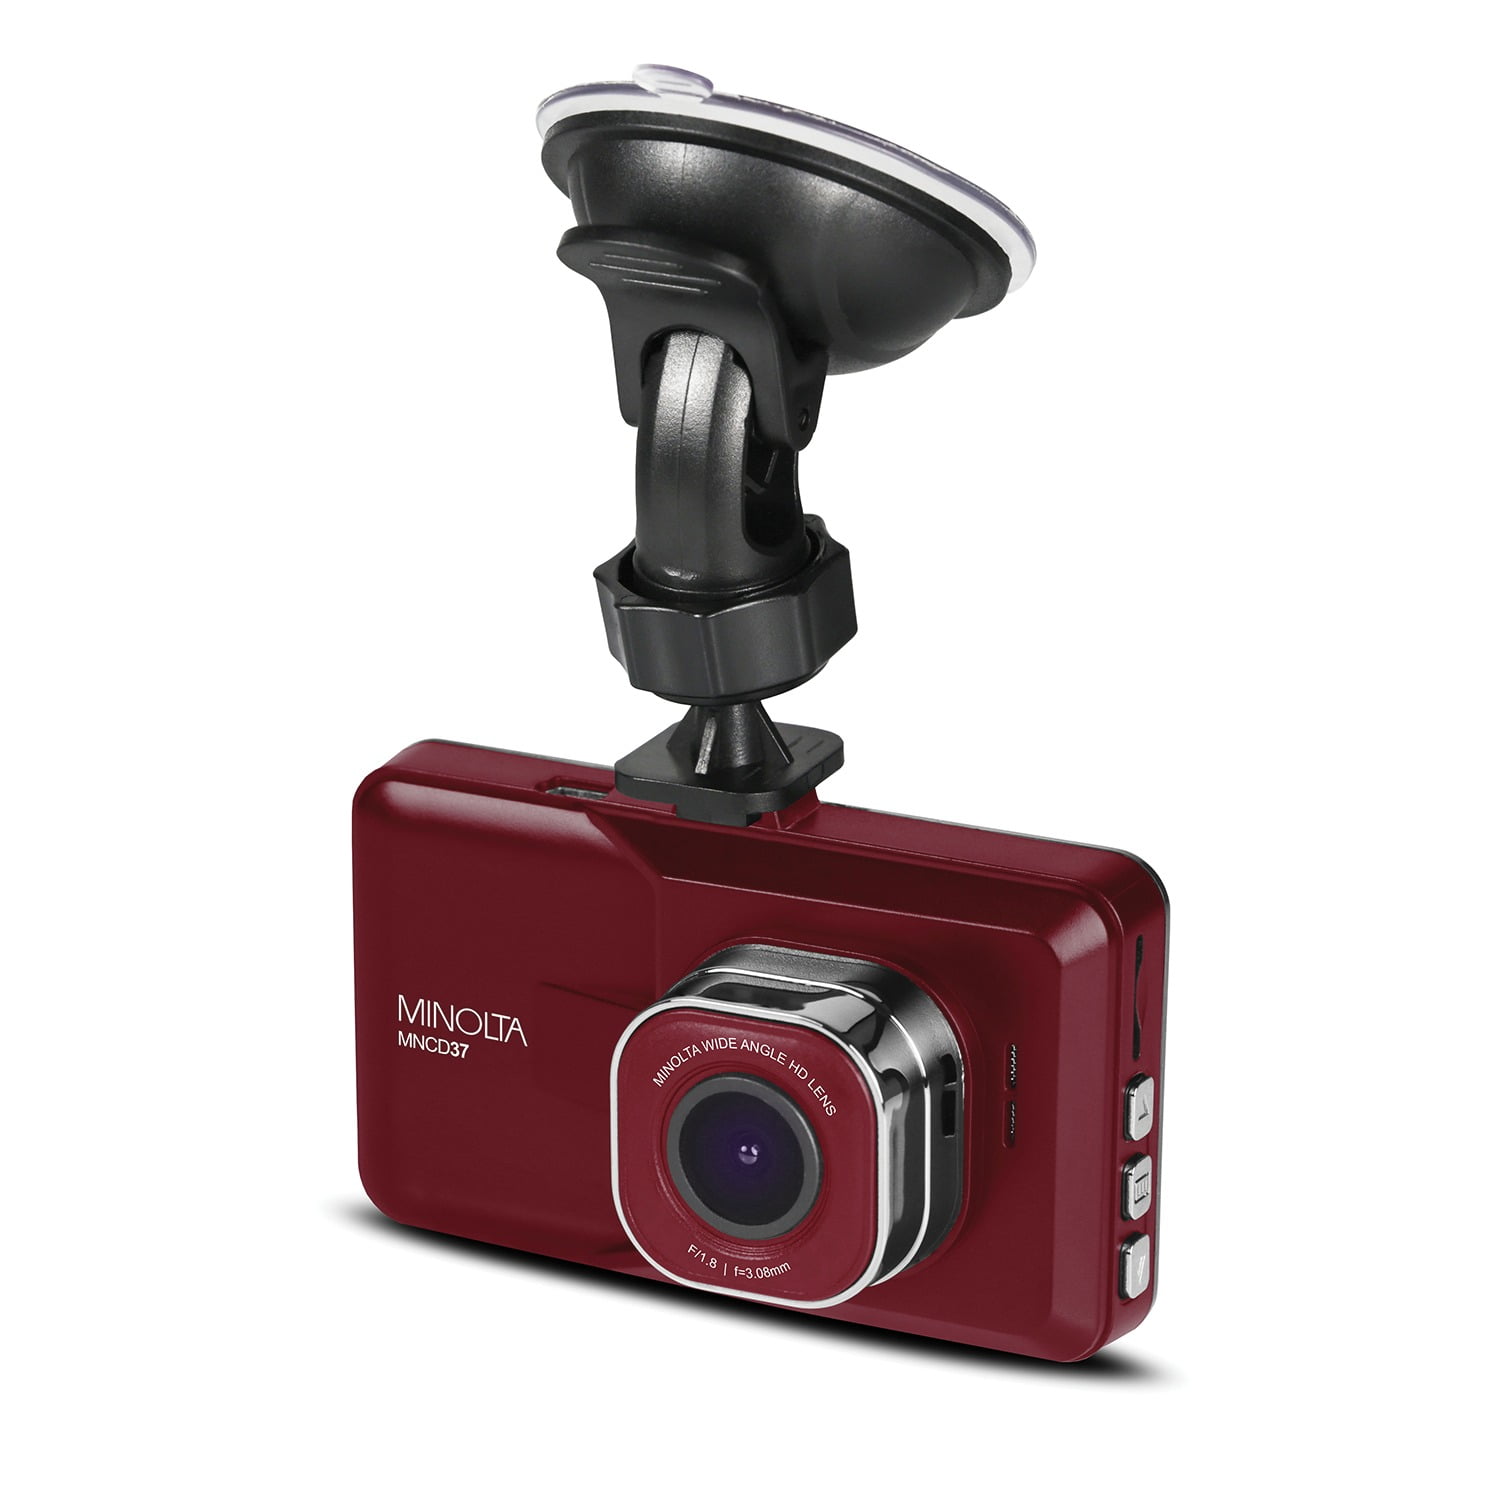 RING RDC, 1000 RDC1000 Dash cam 2 Inch, 720p, Viewing Angle 110